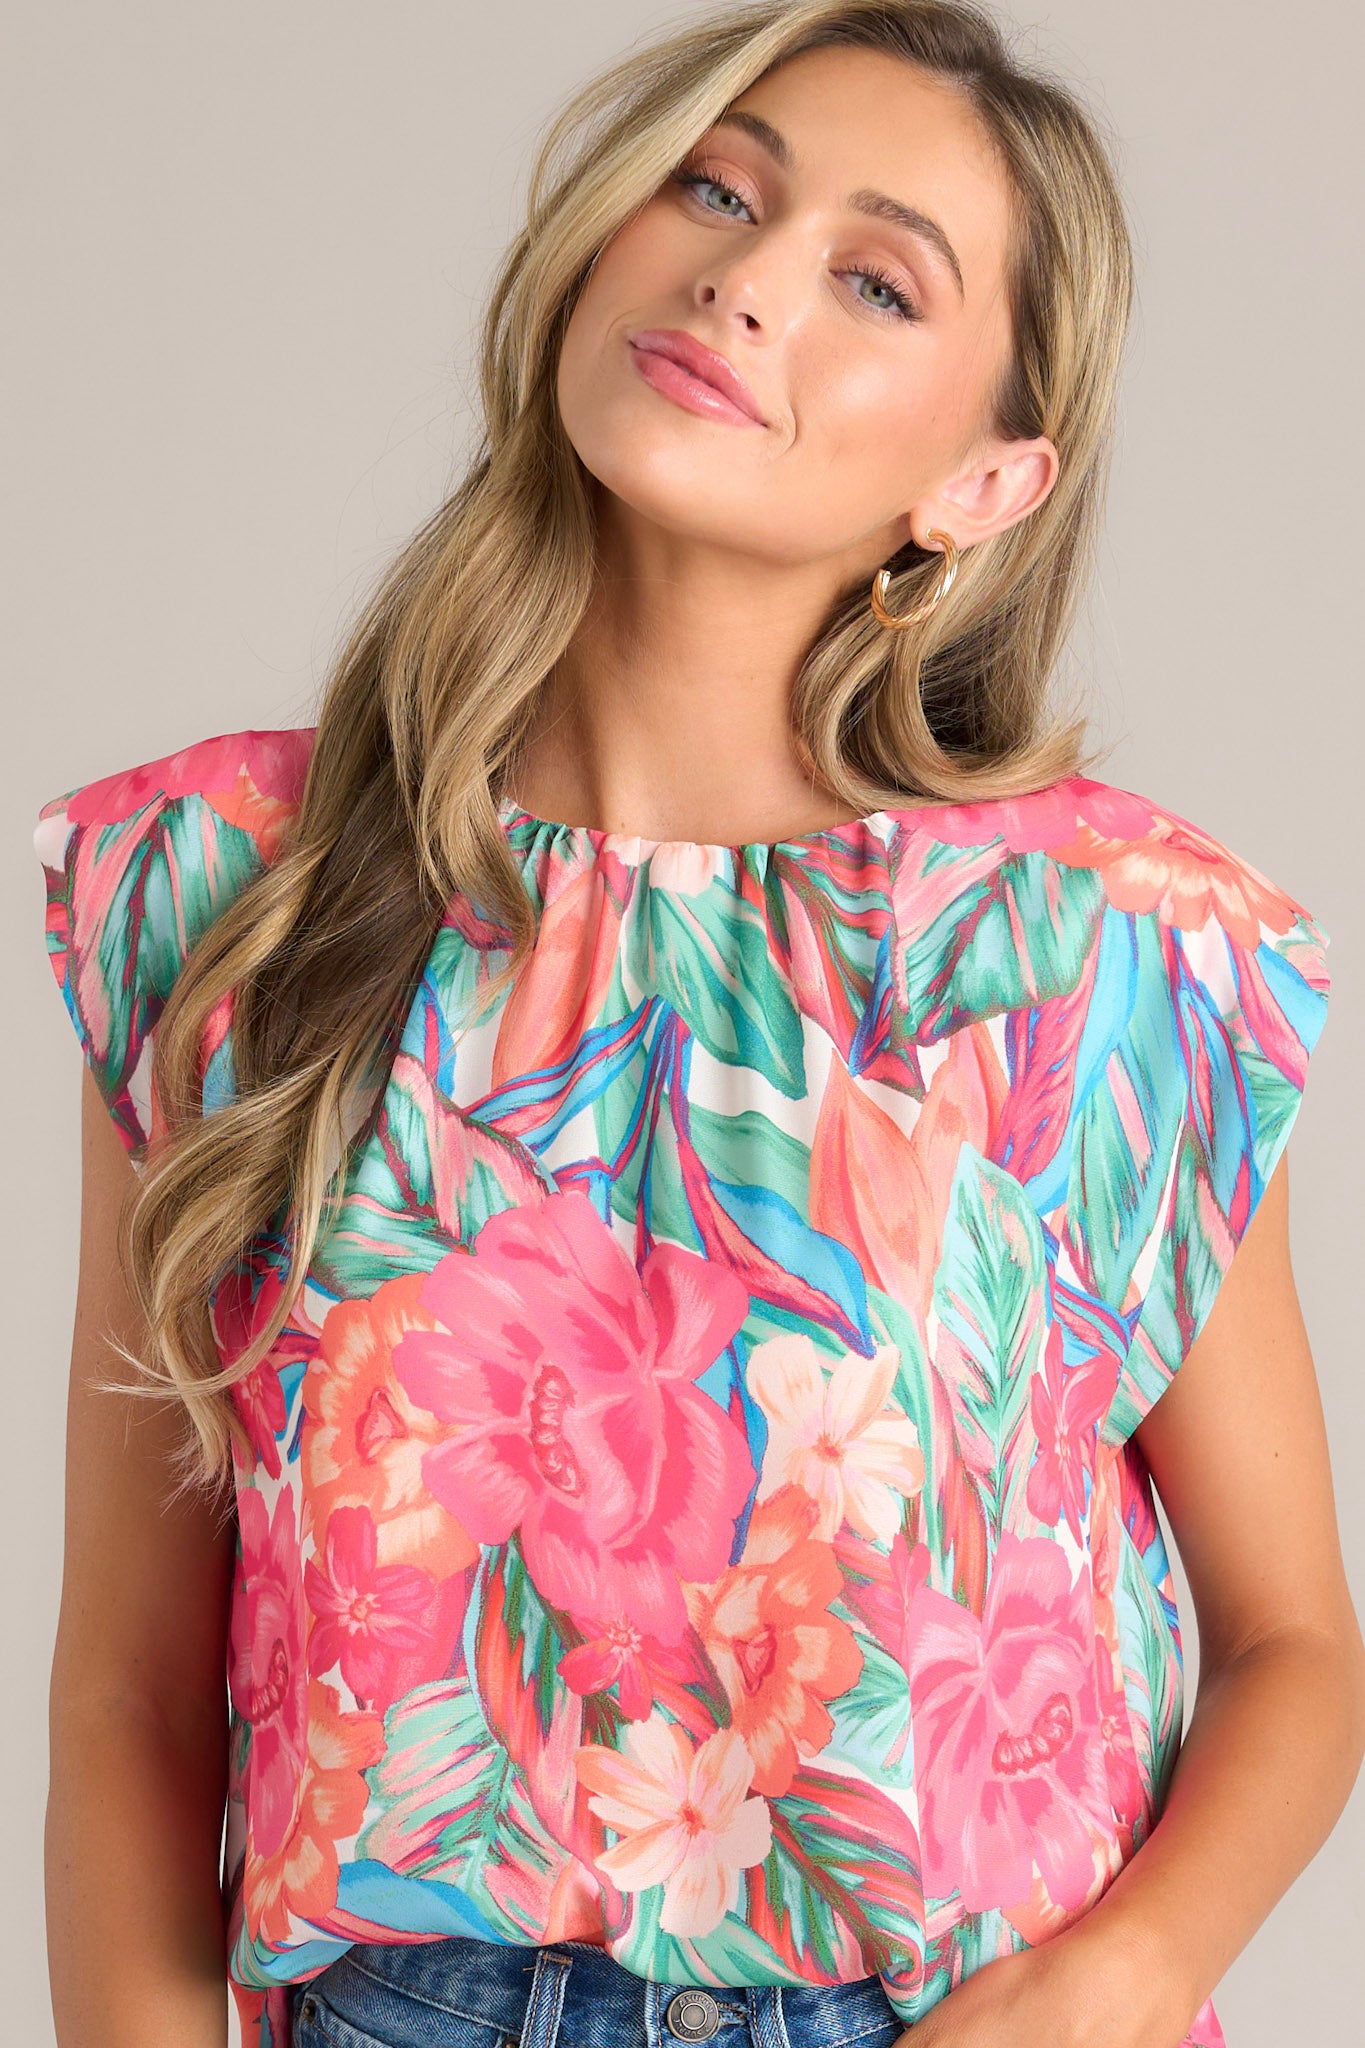 Angled front view of this hot pink floral top that features a crew neckline, shoulder padding, wide short sleeves, and a tropical floral print.